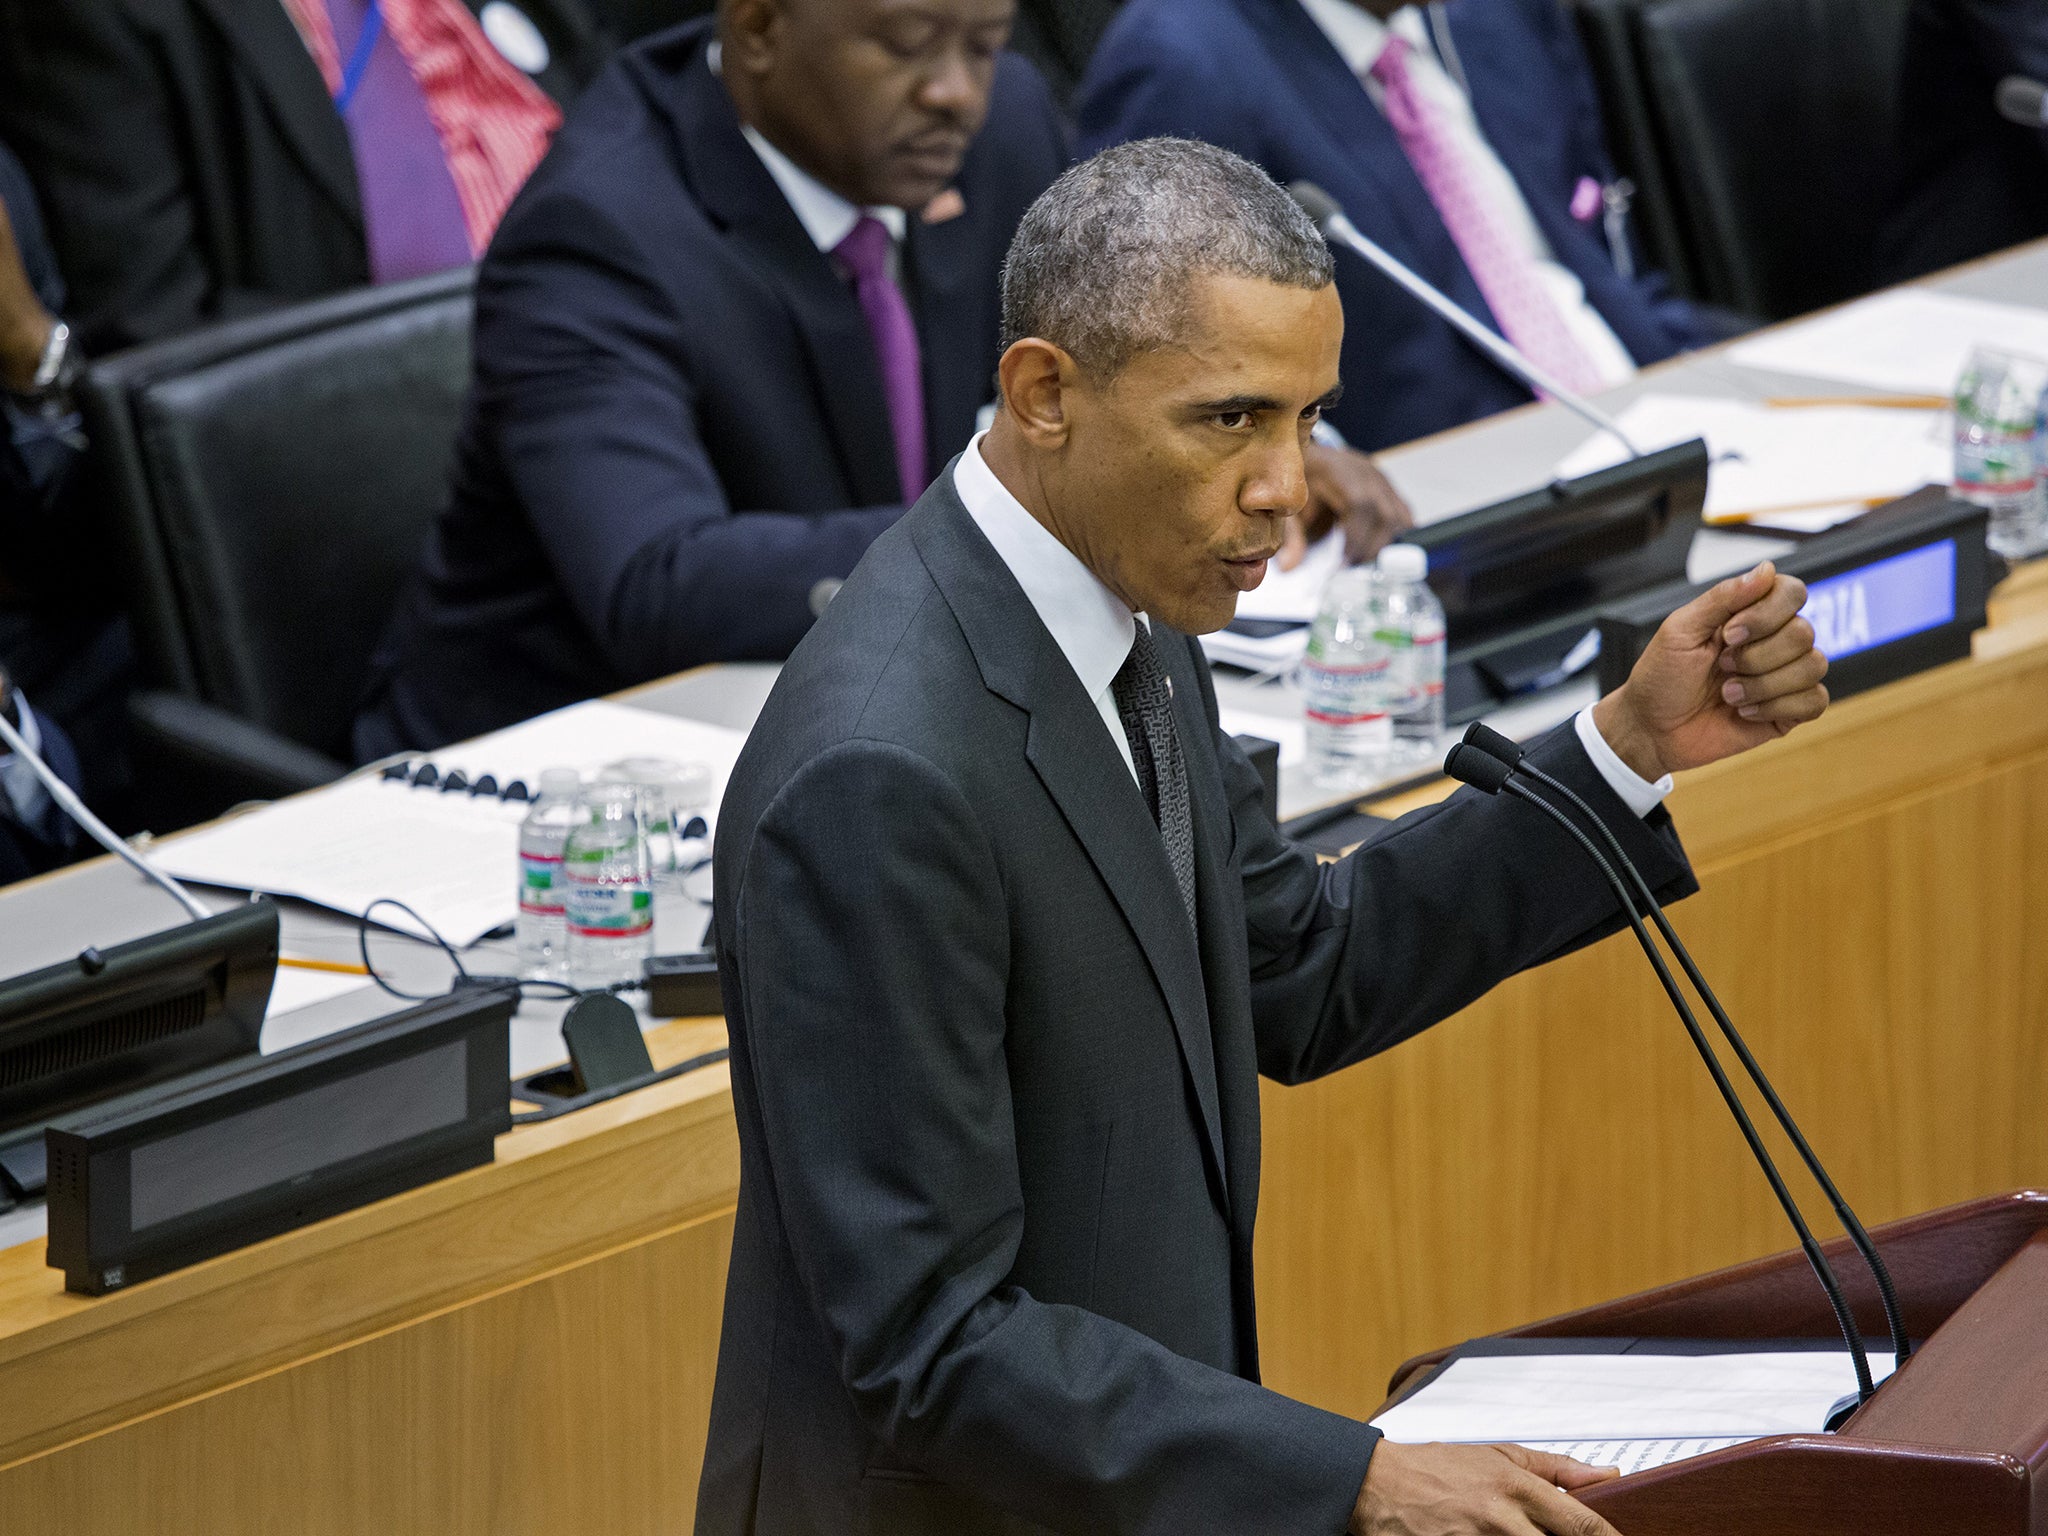 President Barack Obama speaks at a high level meeting on the Ebola outbreak